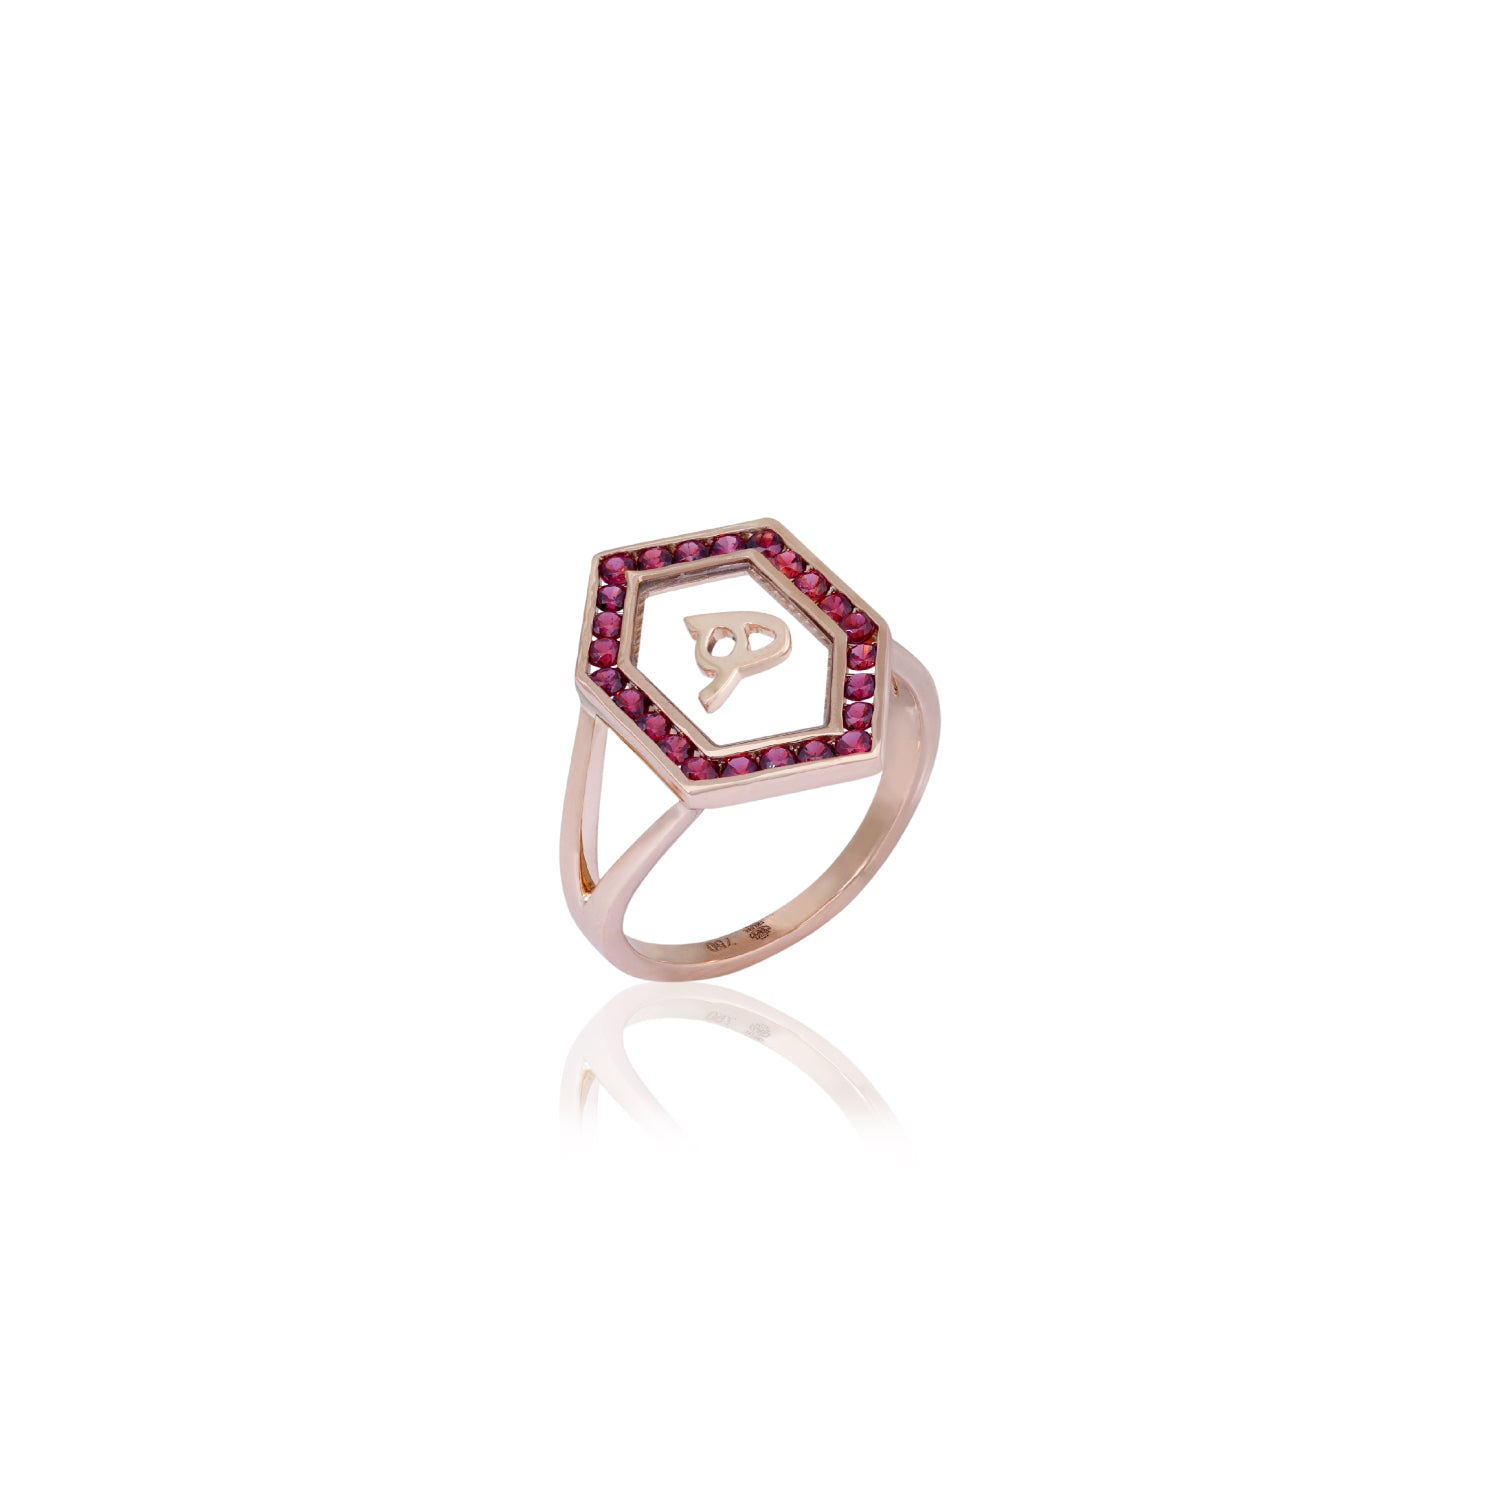 Qamoos 1.0 Letter هـ Ruby Ring in Rose Gold